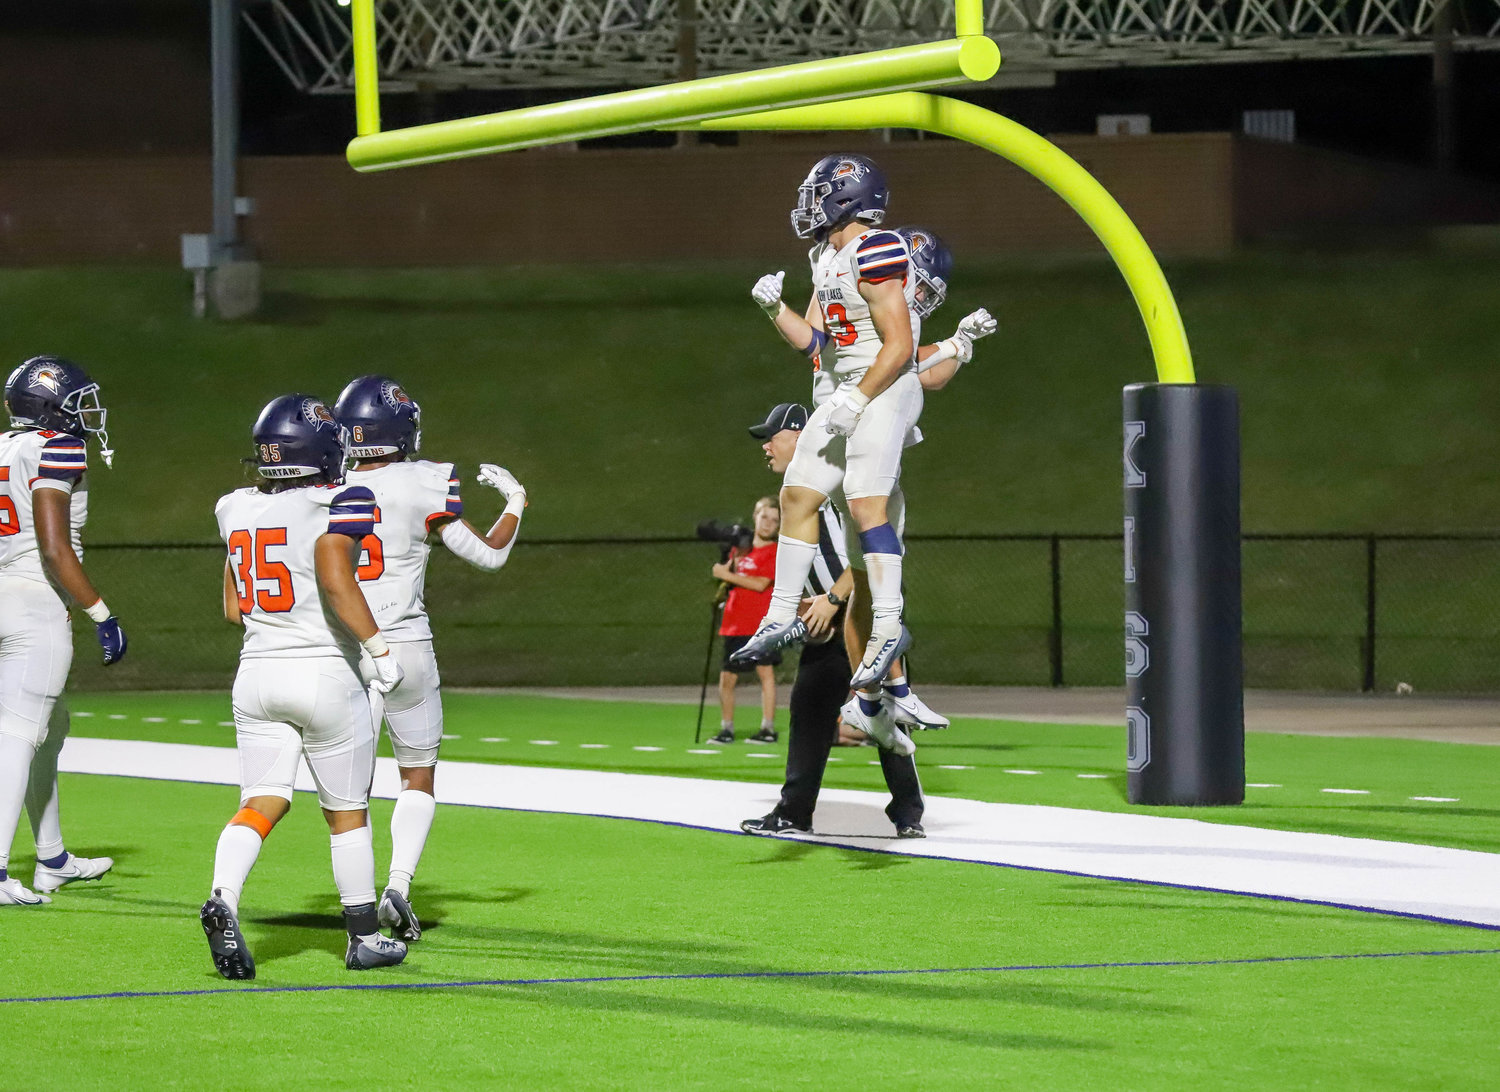 Seven Lakes' Jake Farris celebrates after scoring a touchdown during Friday's game between Seven Lakes and Mayde Creek at Rhodes Stadium.